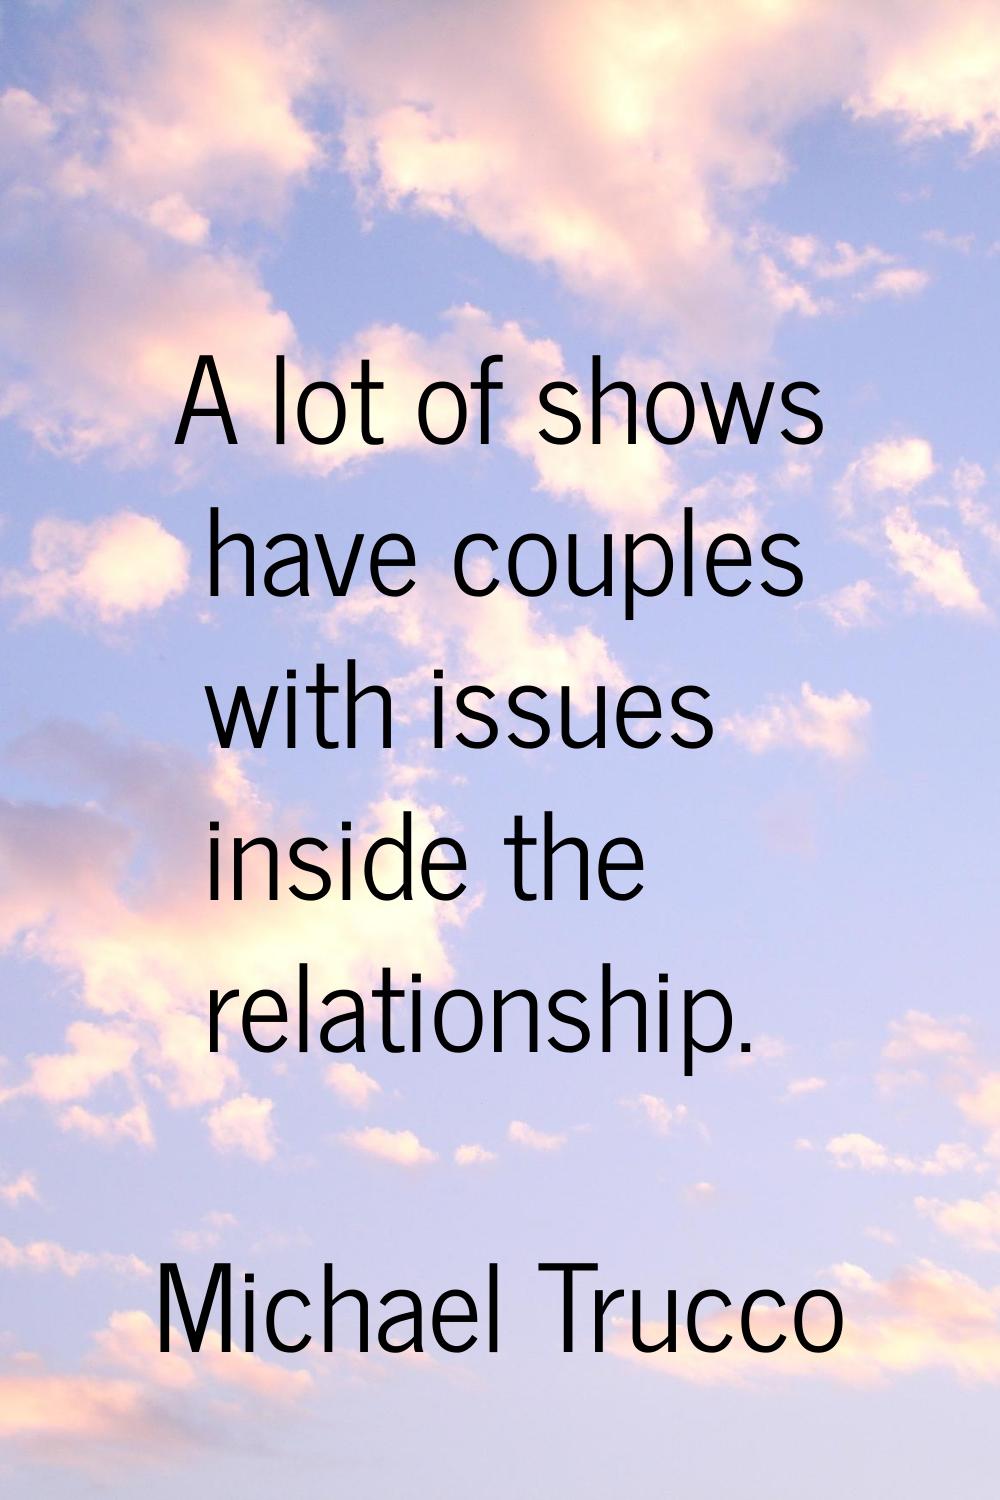 A lot of shows have couples with issues inside the relationship.